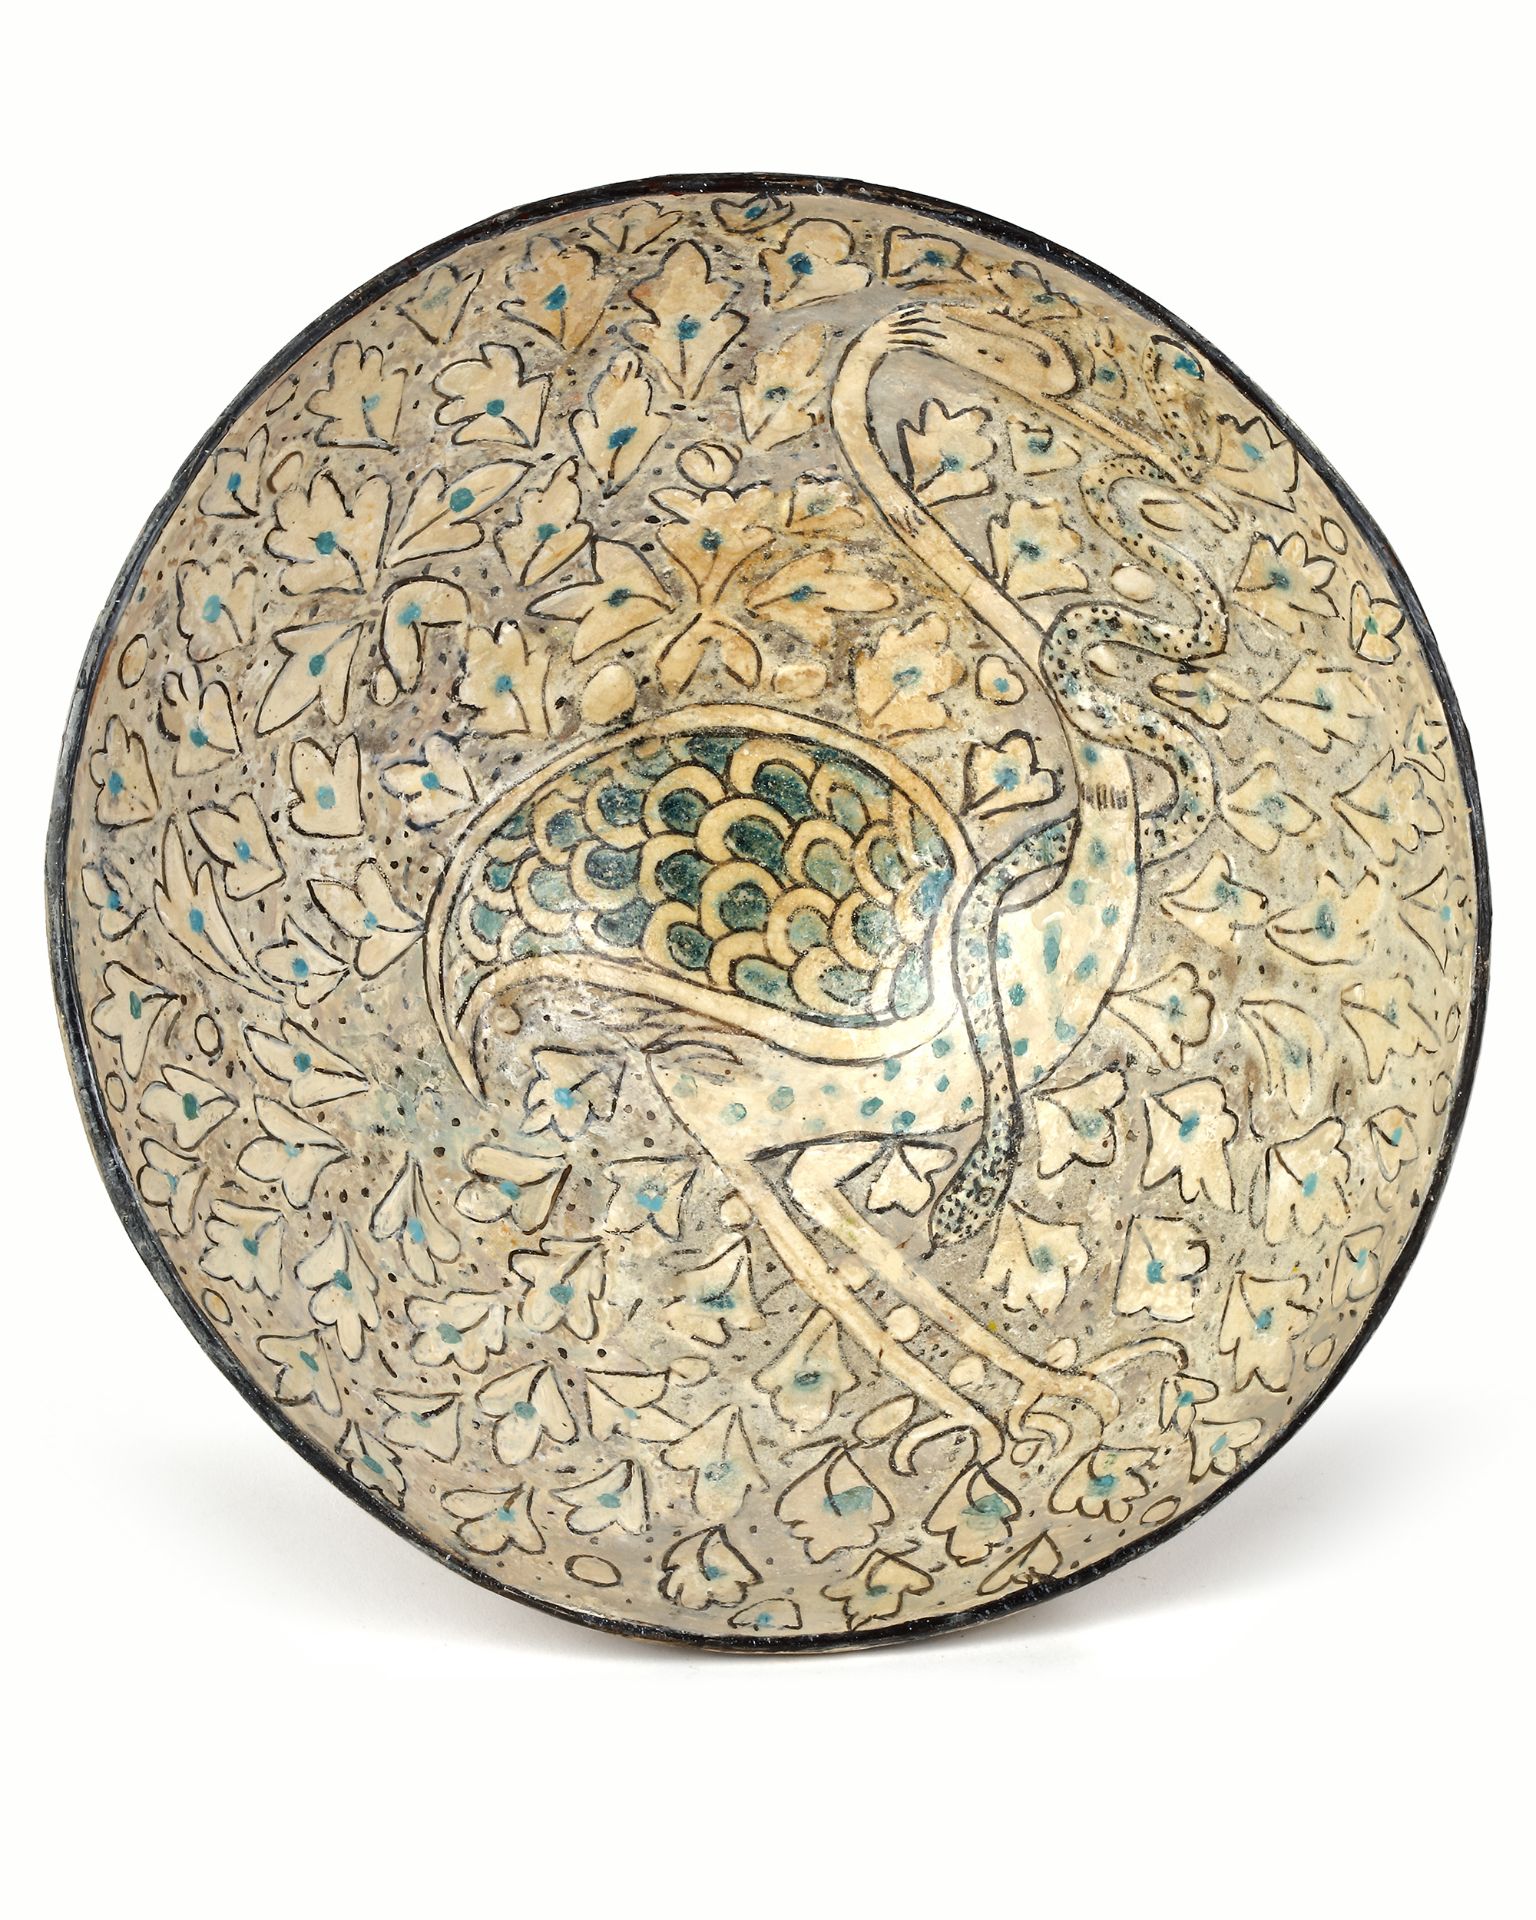 AN ISLAMIC BOWL DEPICTING A BIRD, SULTANABAD WARE, 12TH-13TH CENTURY